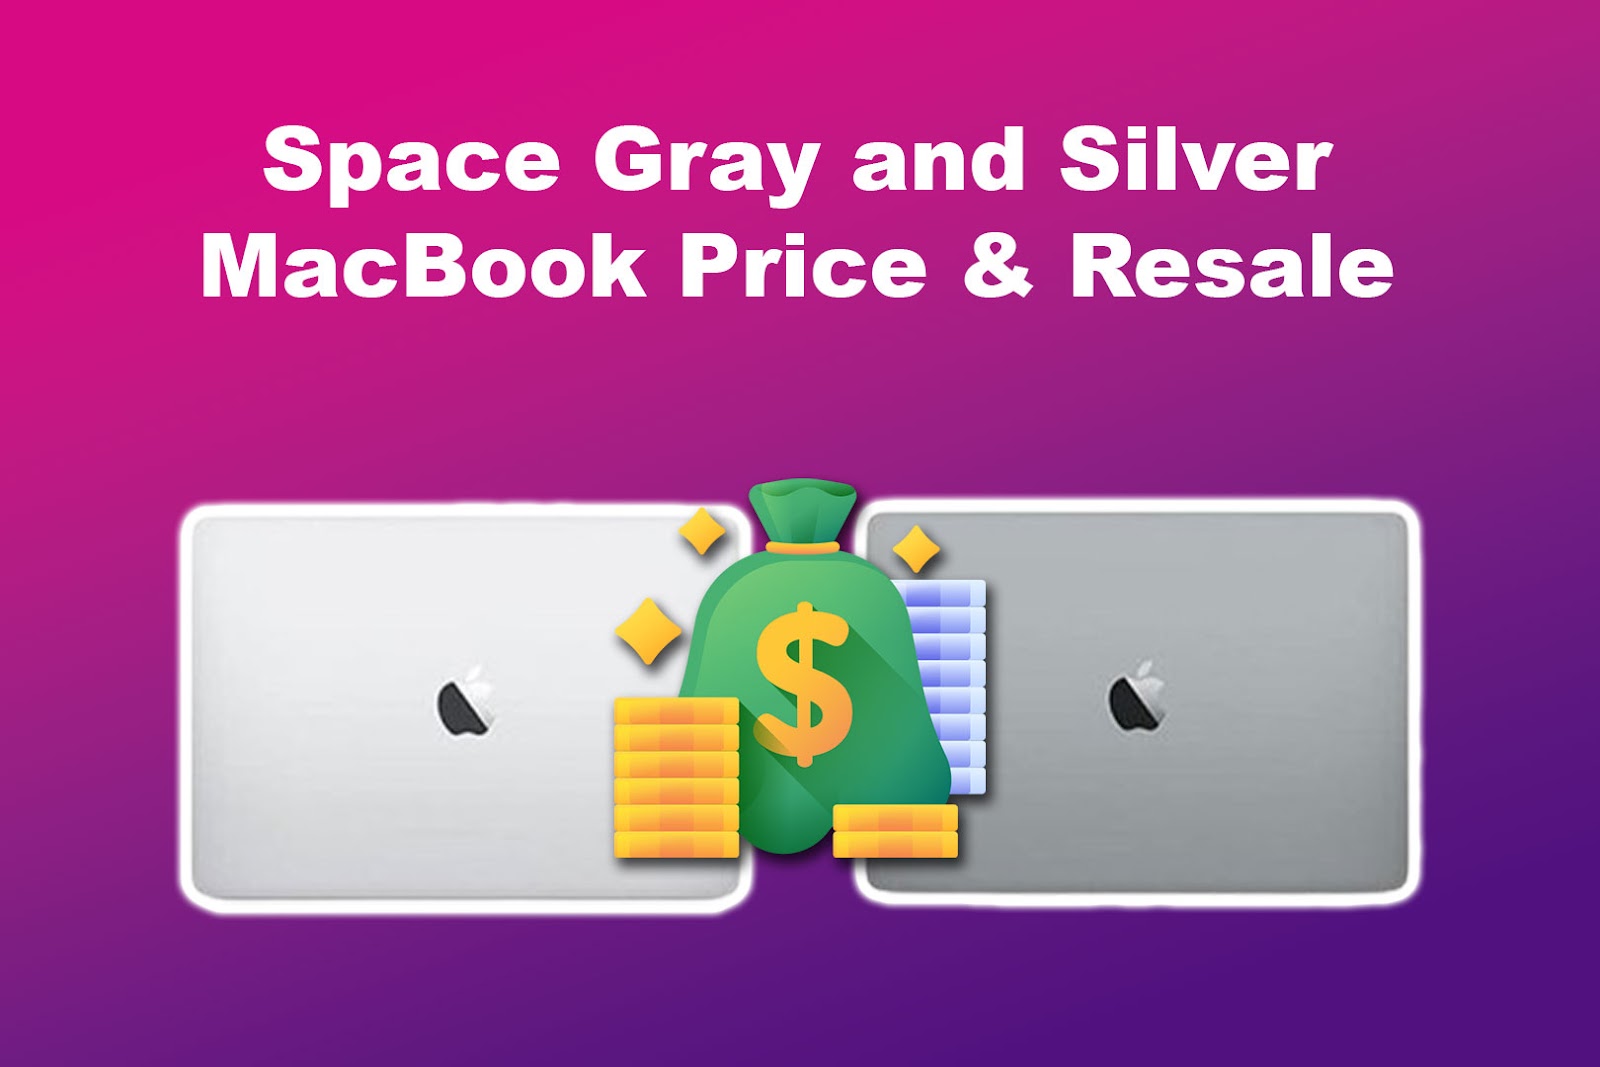 Space Gray’s and Silver MacBook Price and Resale